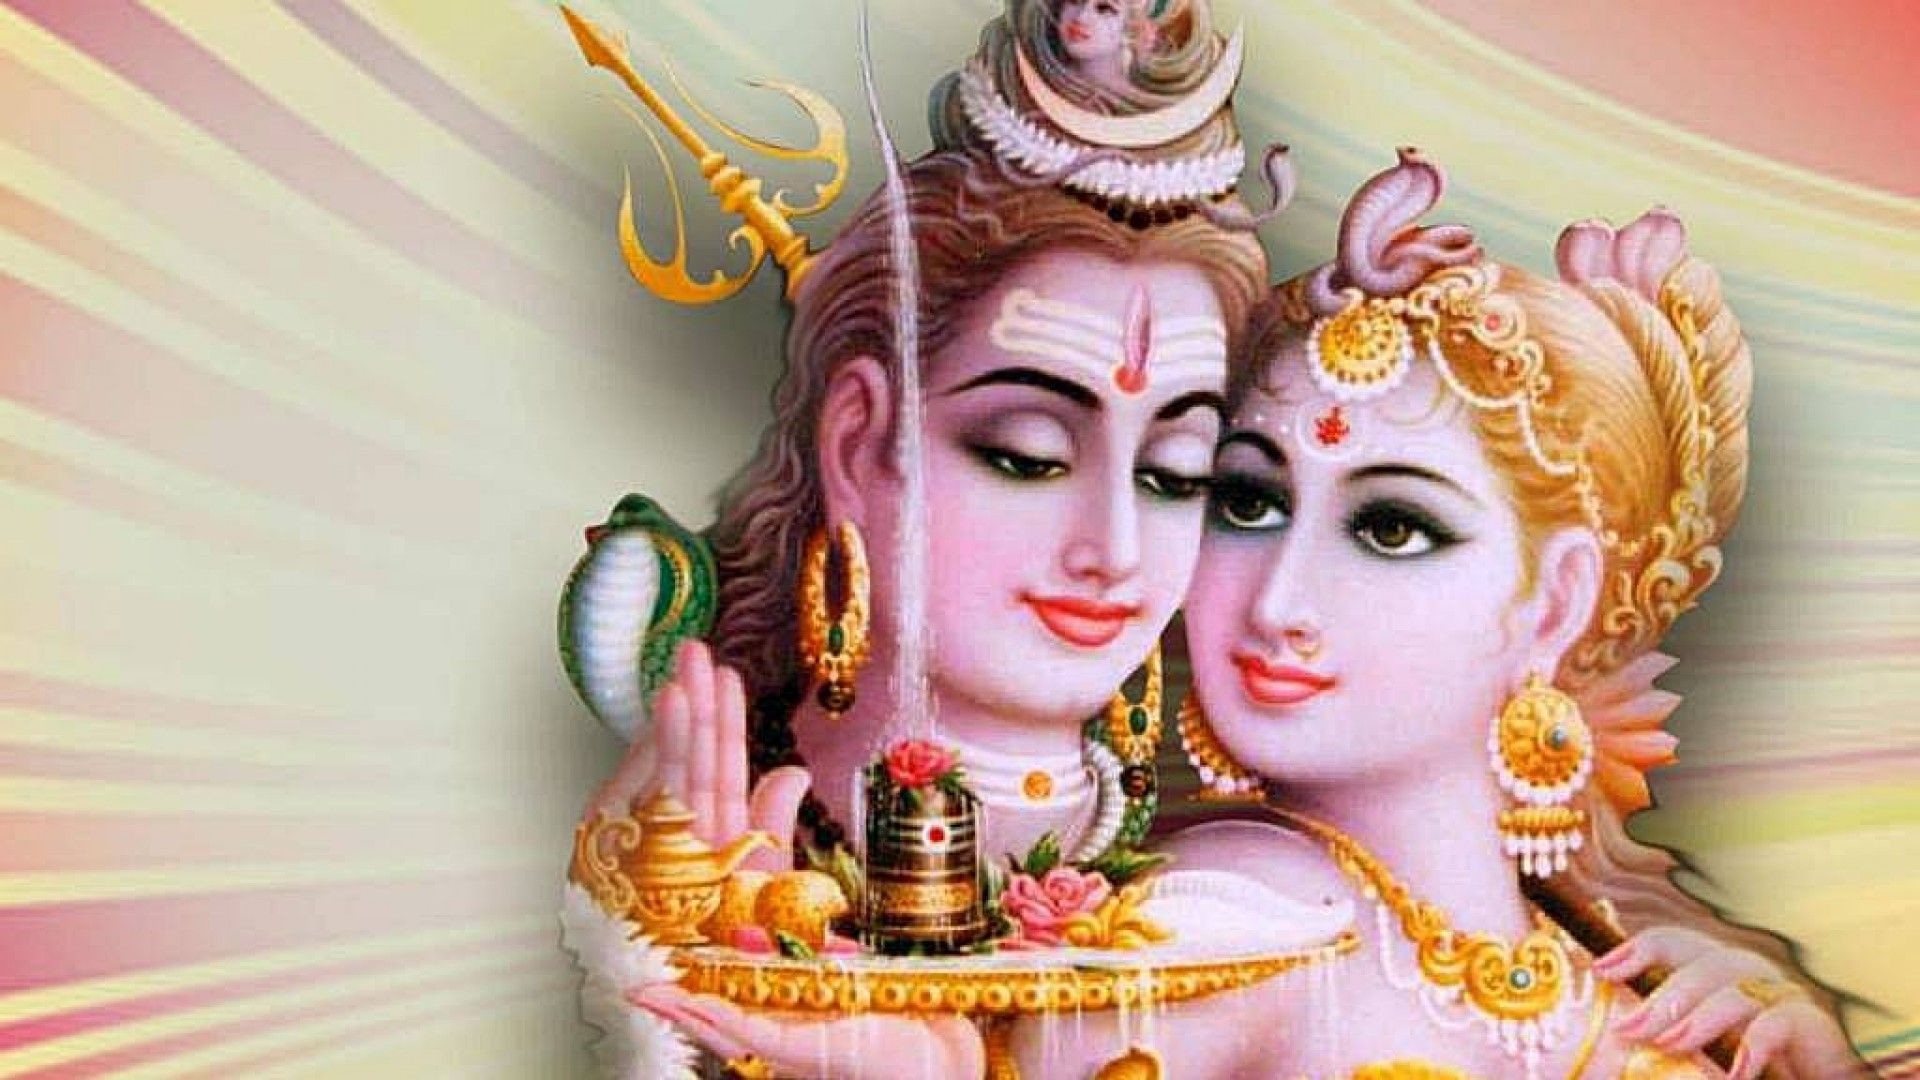 Gallery of wallpaper download of lord shiva